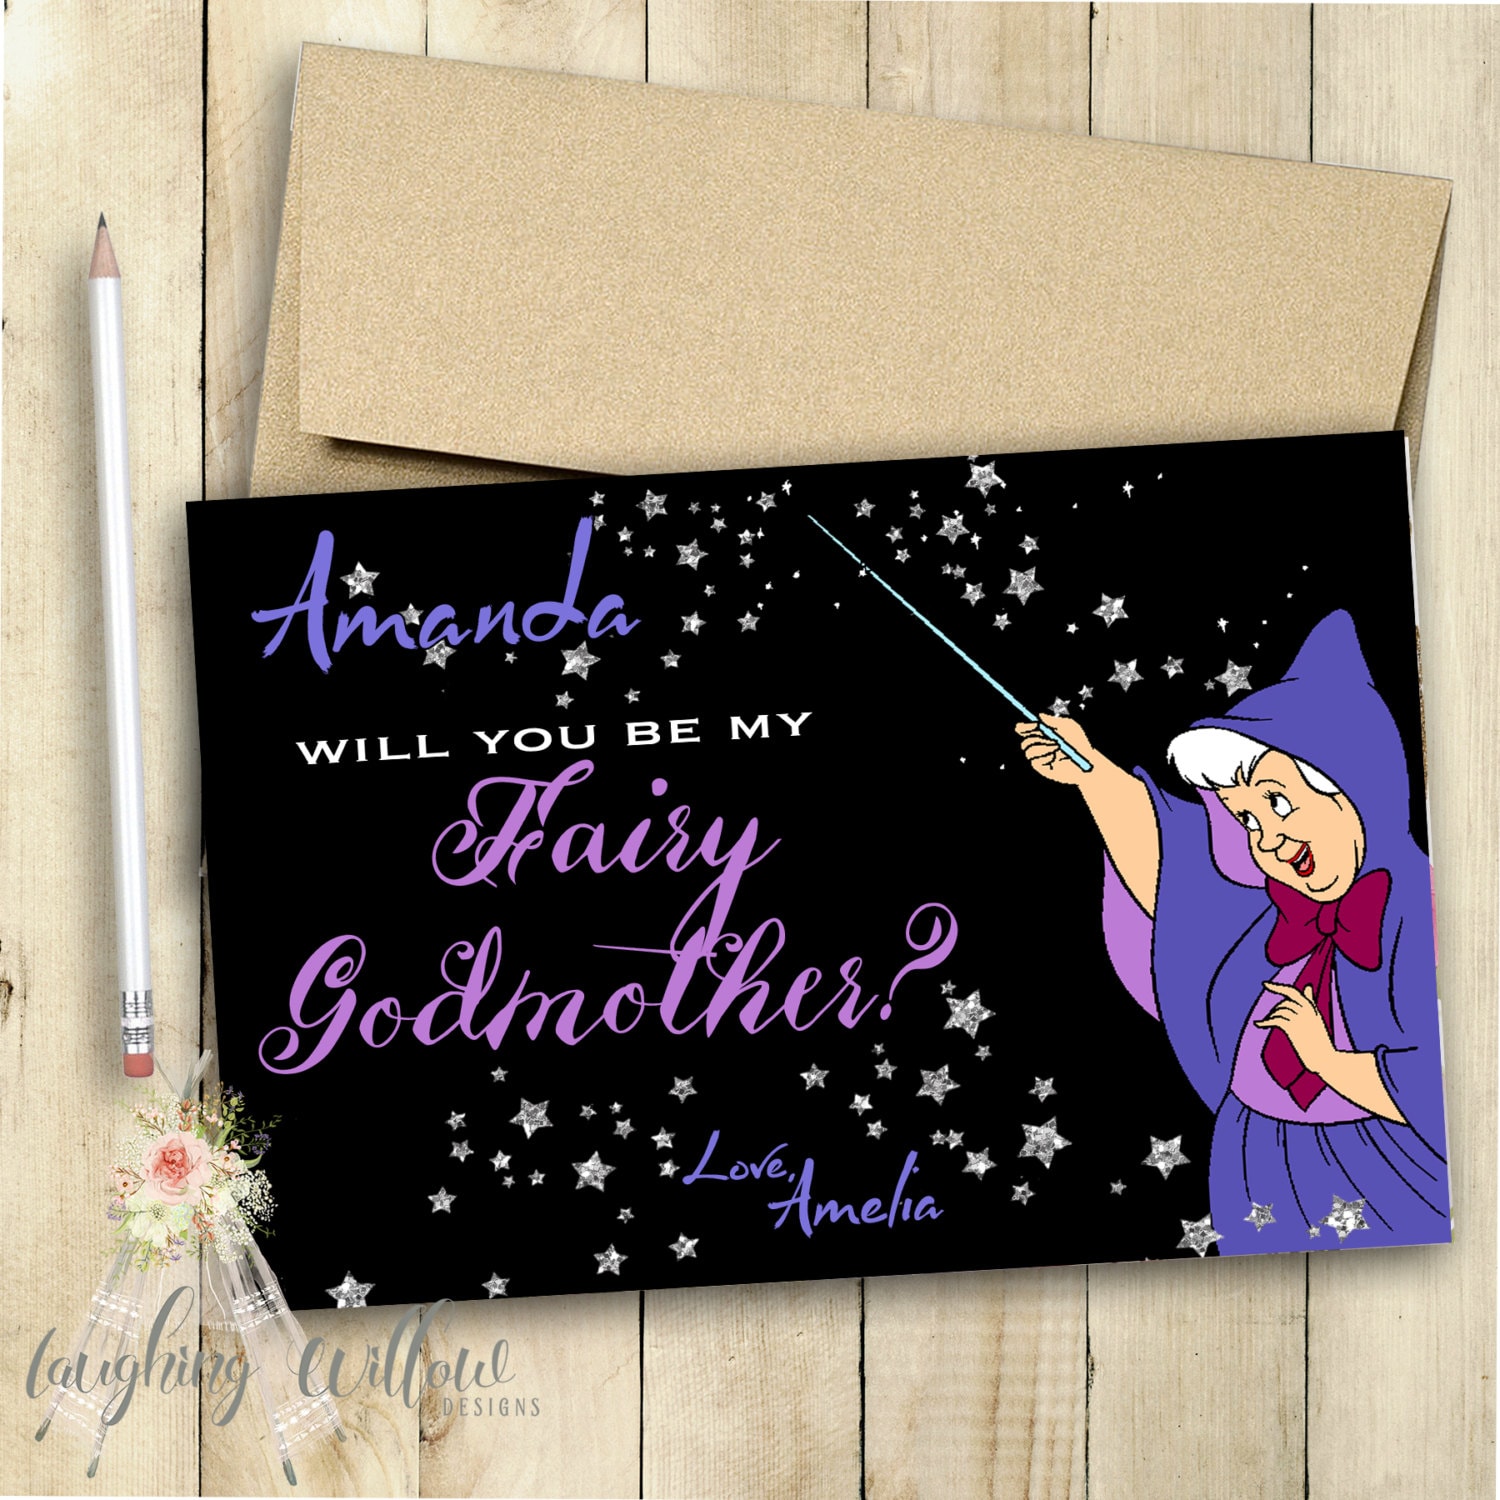 godmother-card-fairy-godmother-card-will-you-be-my-godmother